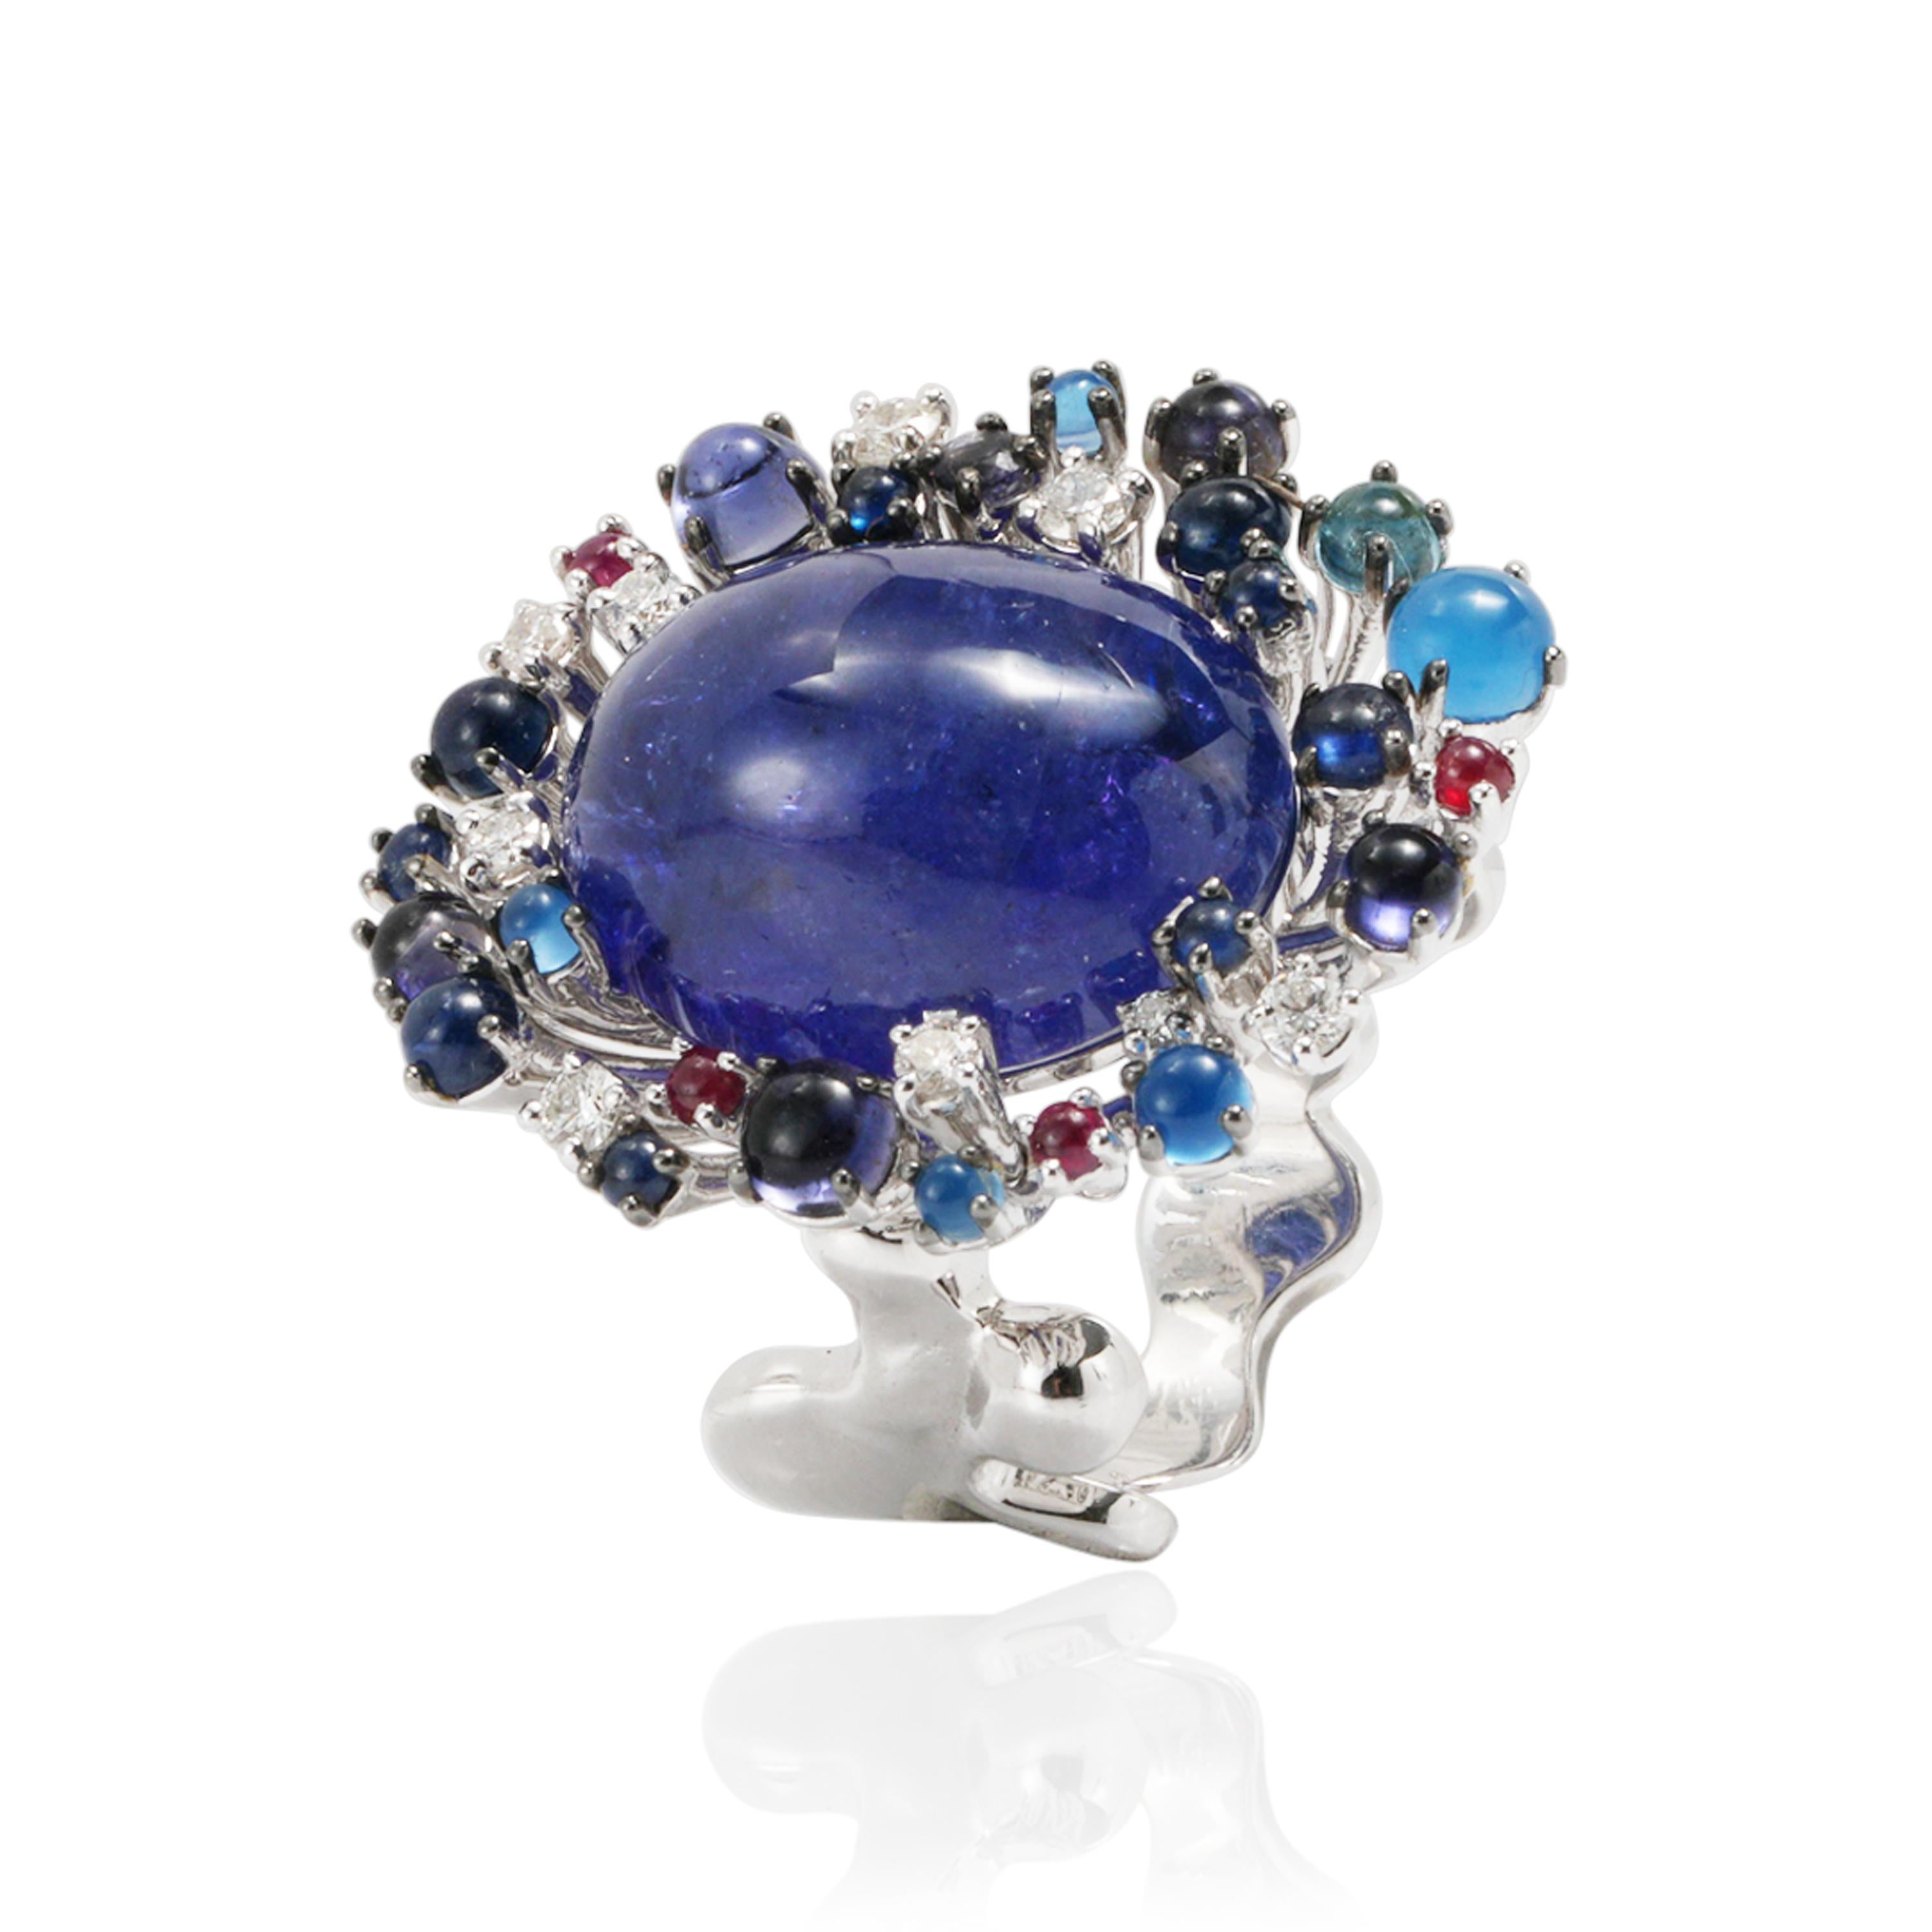 Cabochon cut tanzanite ring created in white gold 18k with diamonds and precious stones: topaz, sapphires, iolites, agate and rubies.
A one of a kind piece from Masterpieces collection signed by DAVERIO1933. 